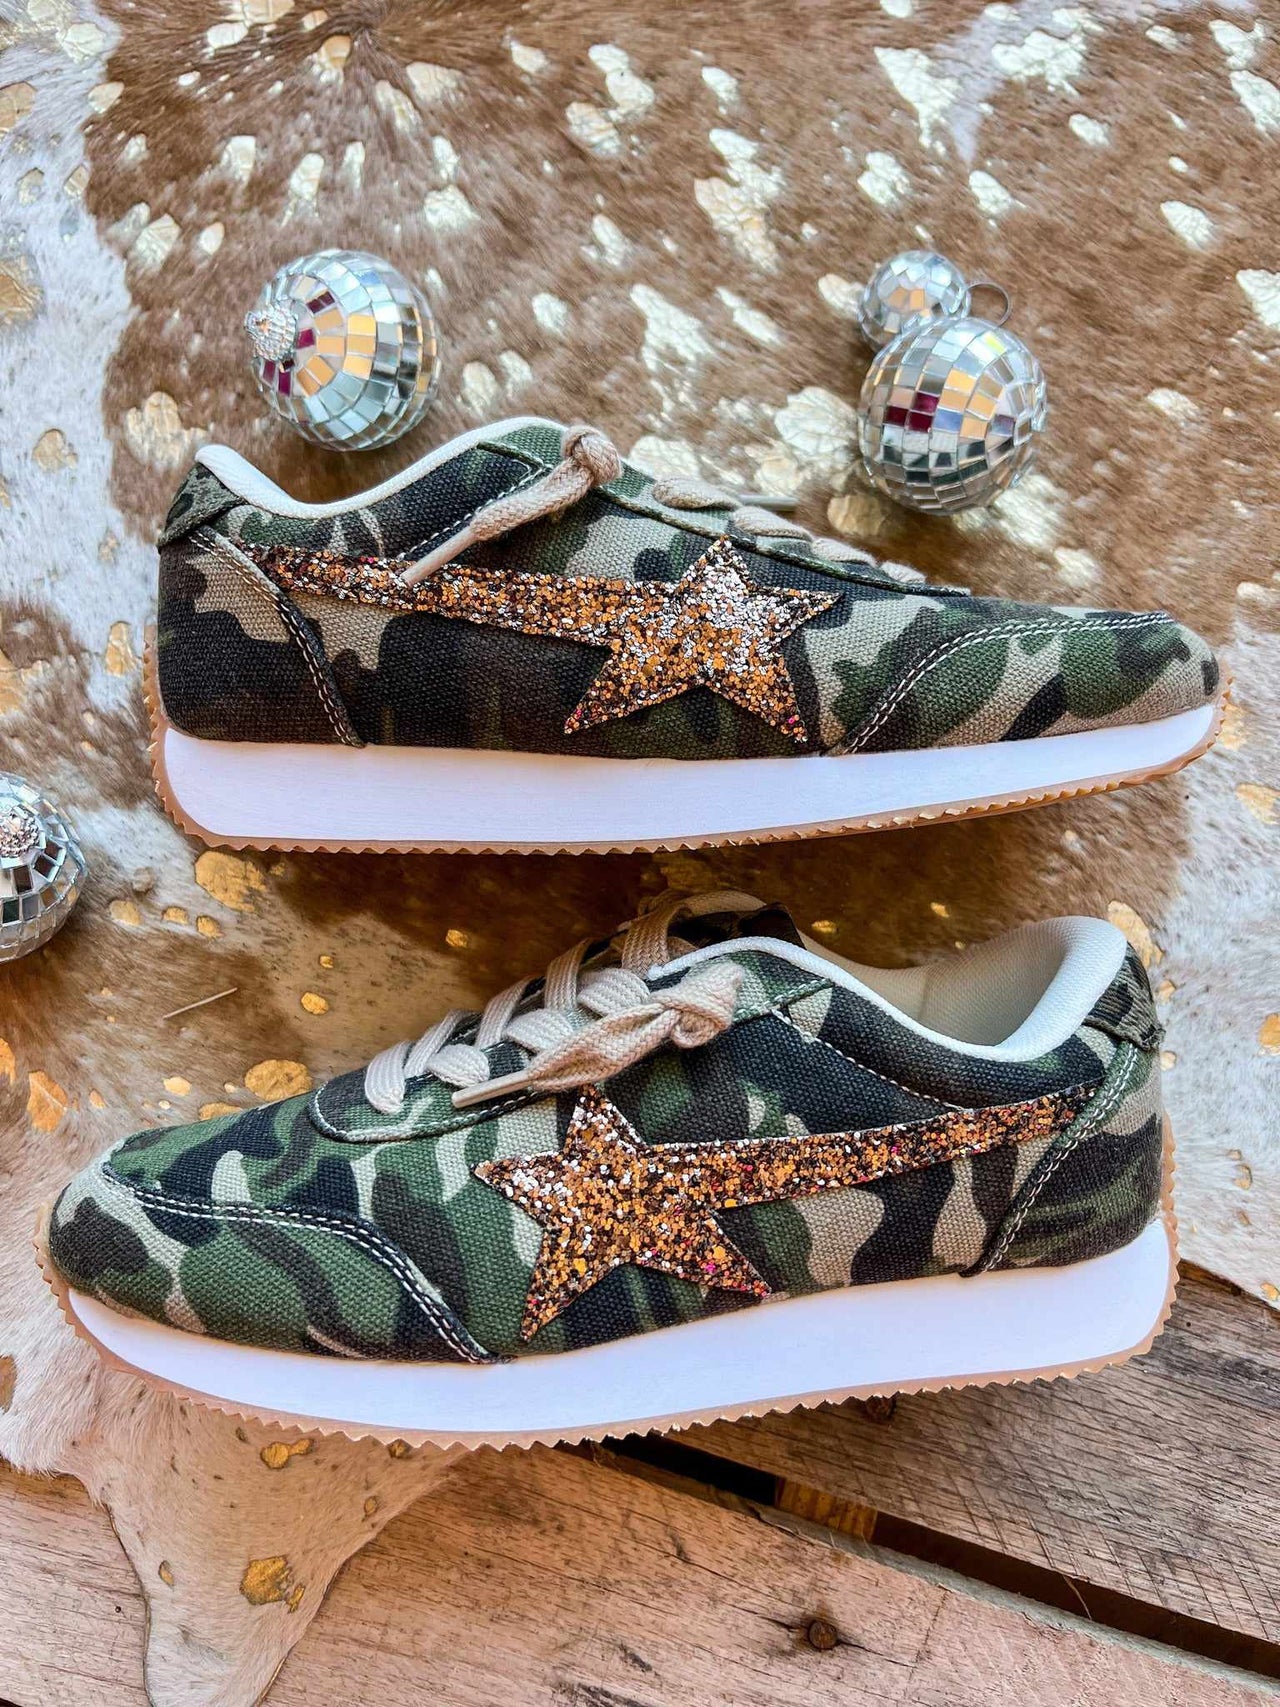 Camo sneakers with gold star.